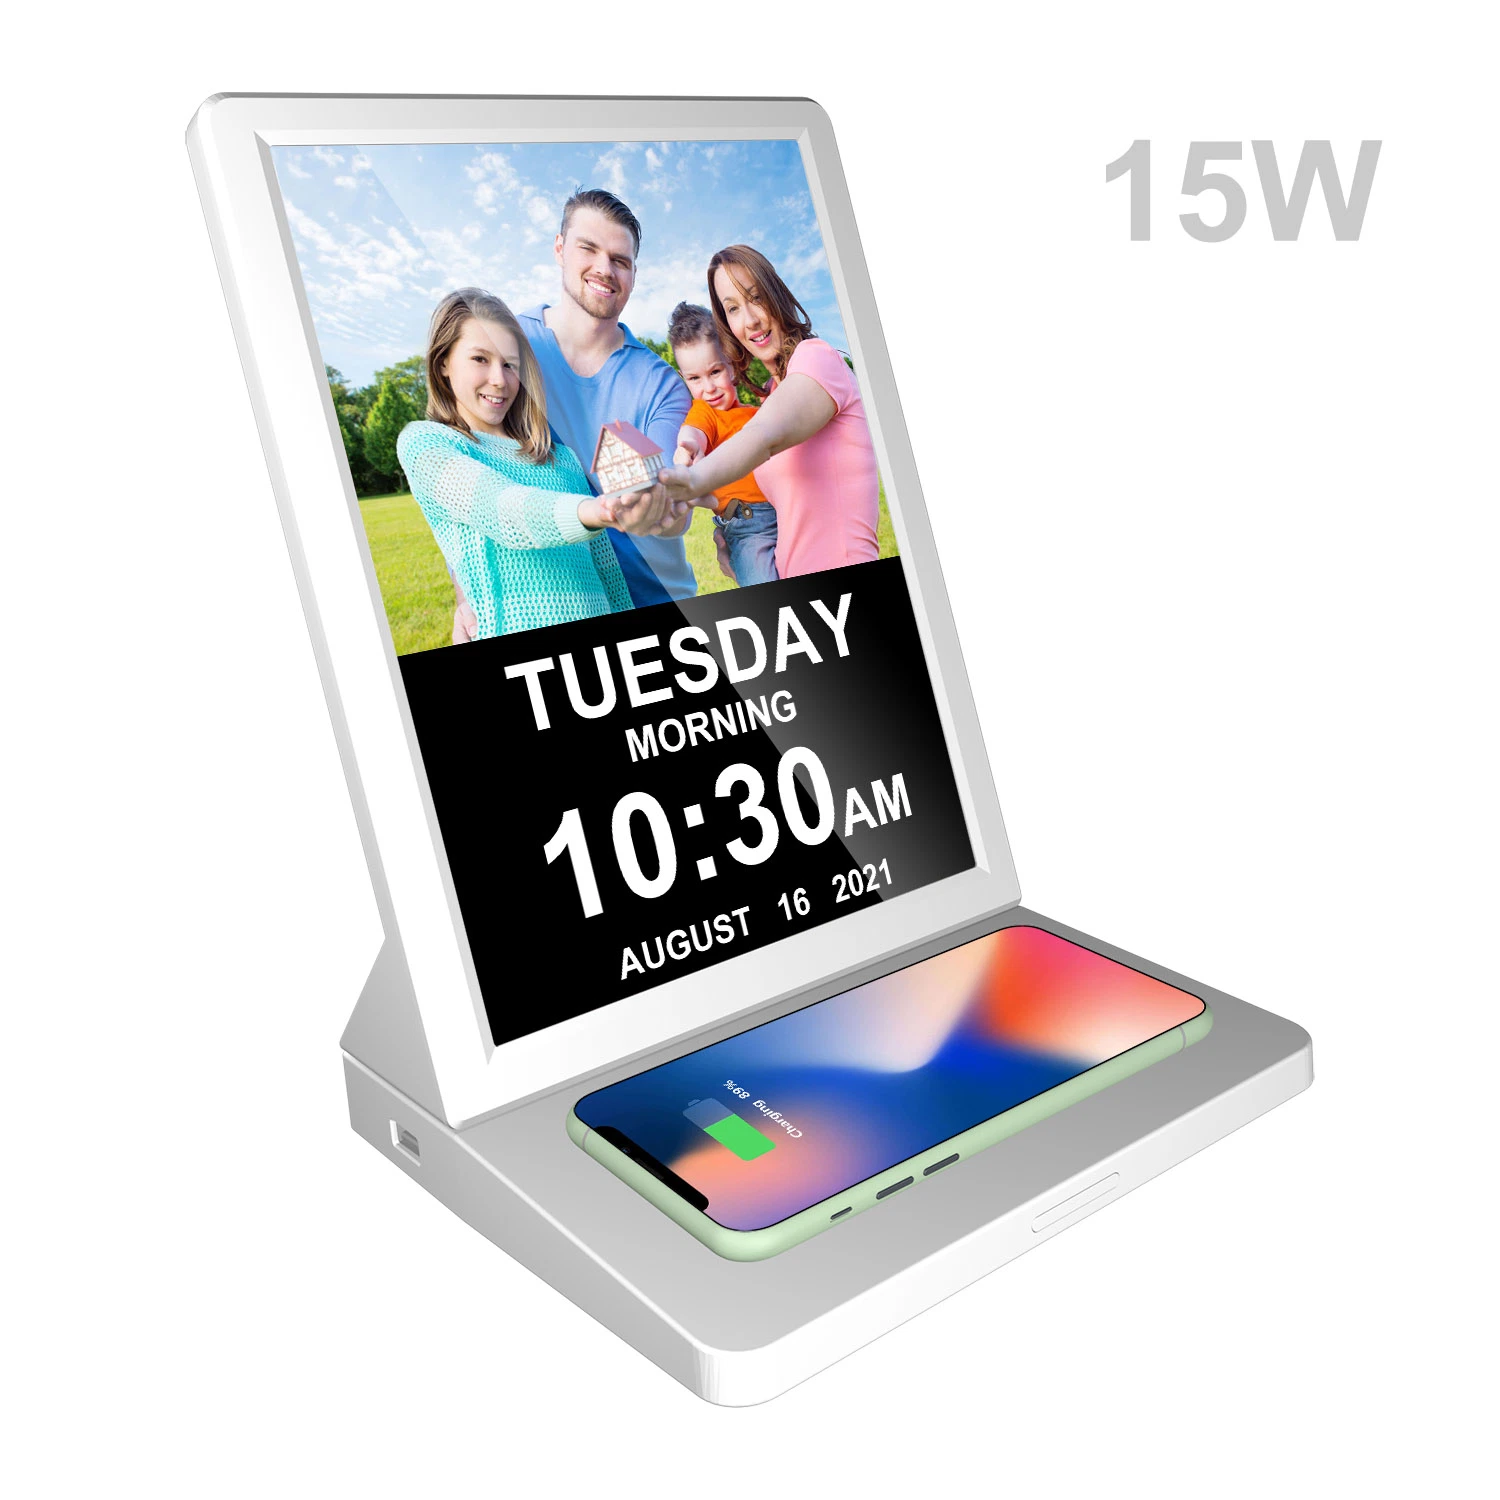 New Operated High Capacity Battery Desktop WiFi Digital Photo Frame with Wireless Charger